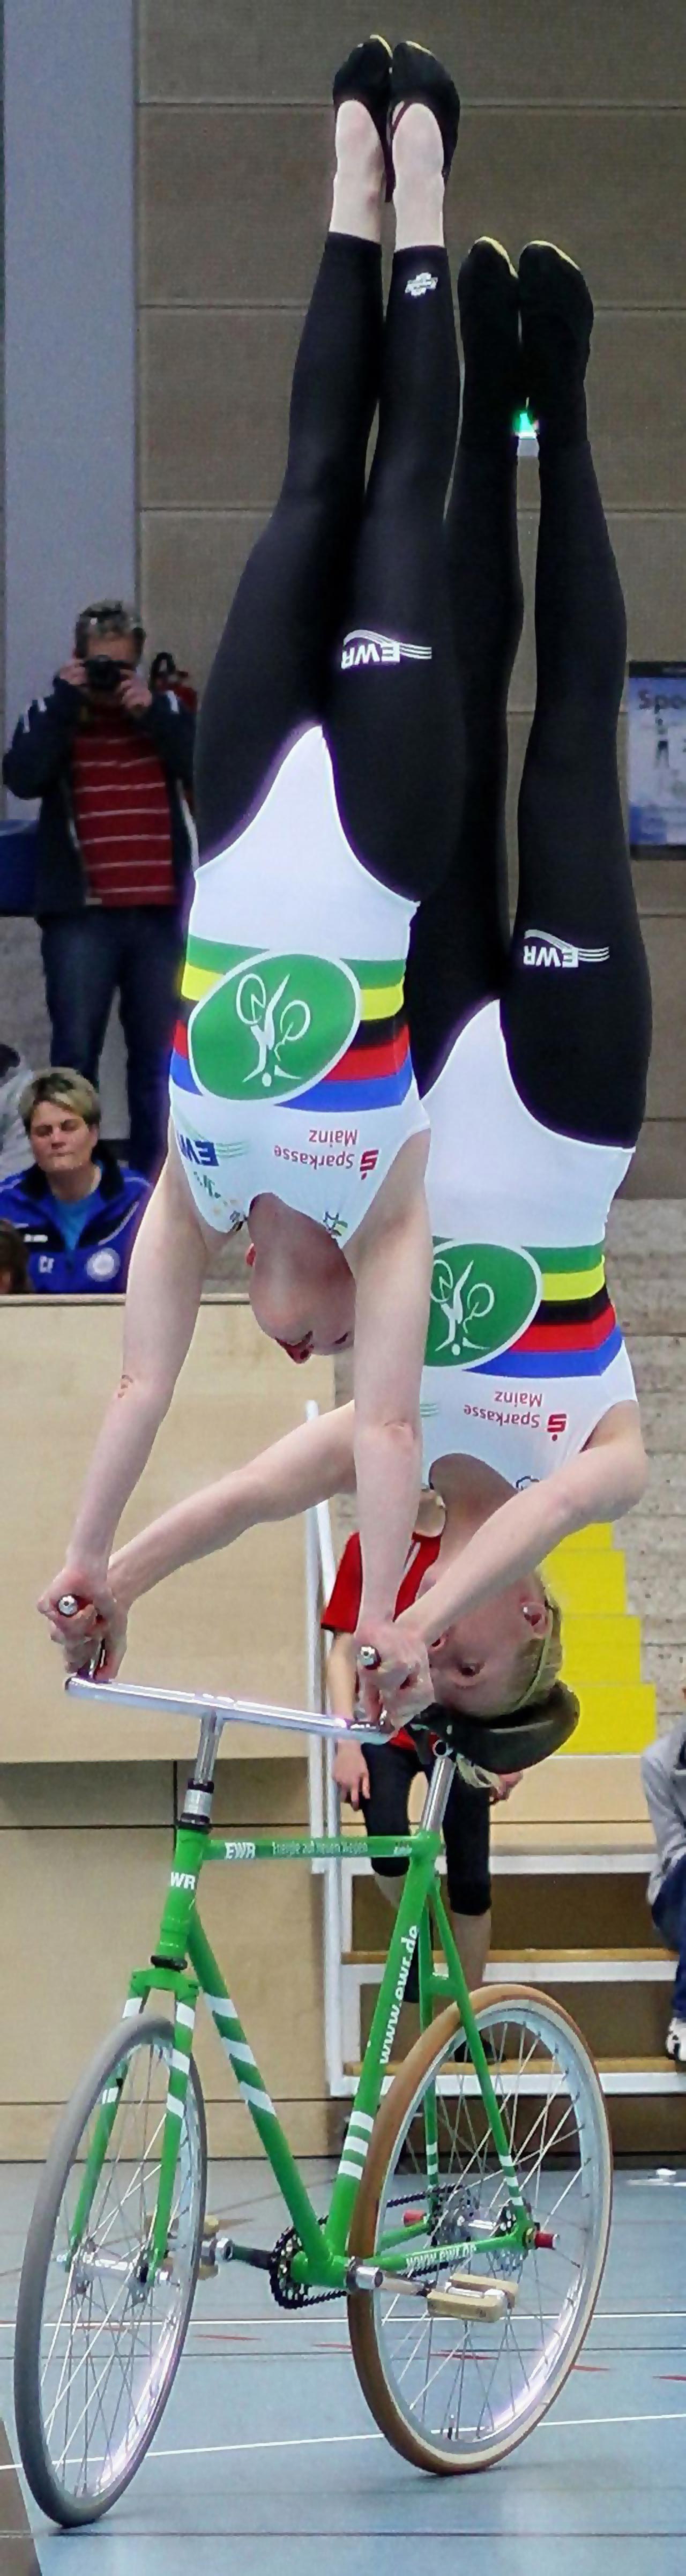 Artistic Cycling: Katrin Schultheis, Sandra Sprinkmeier, Germany, world-champions, handstand, headstand